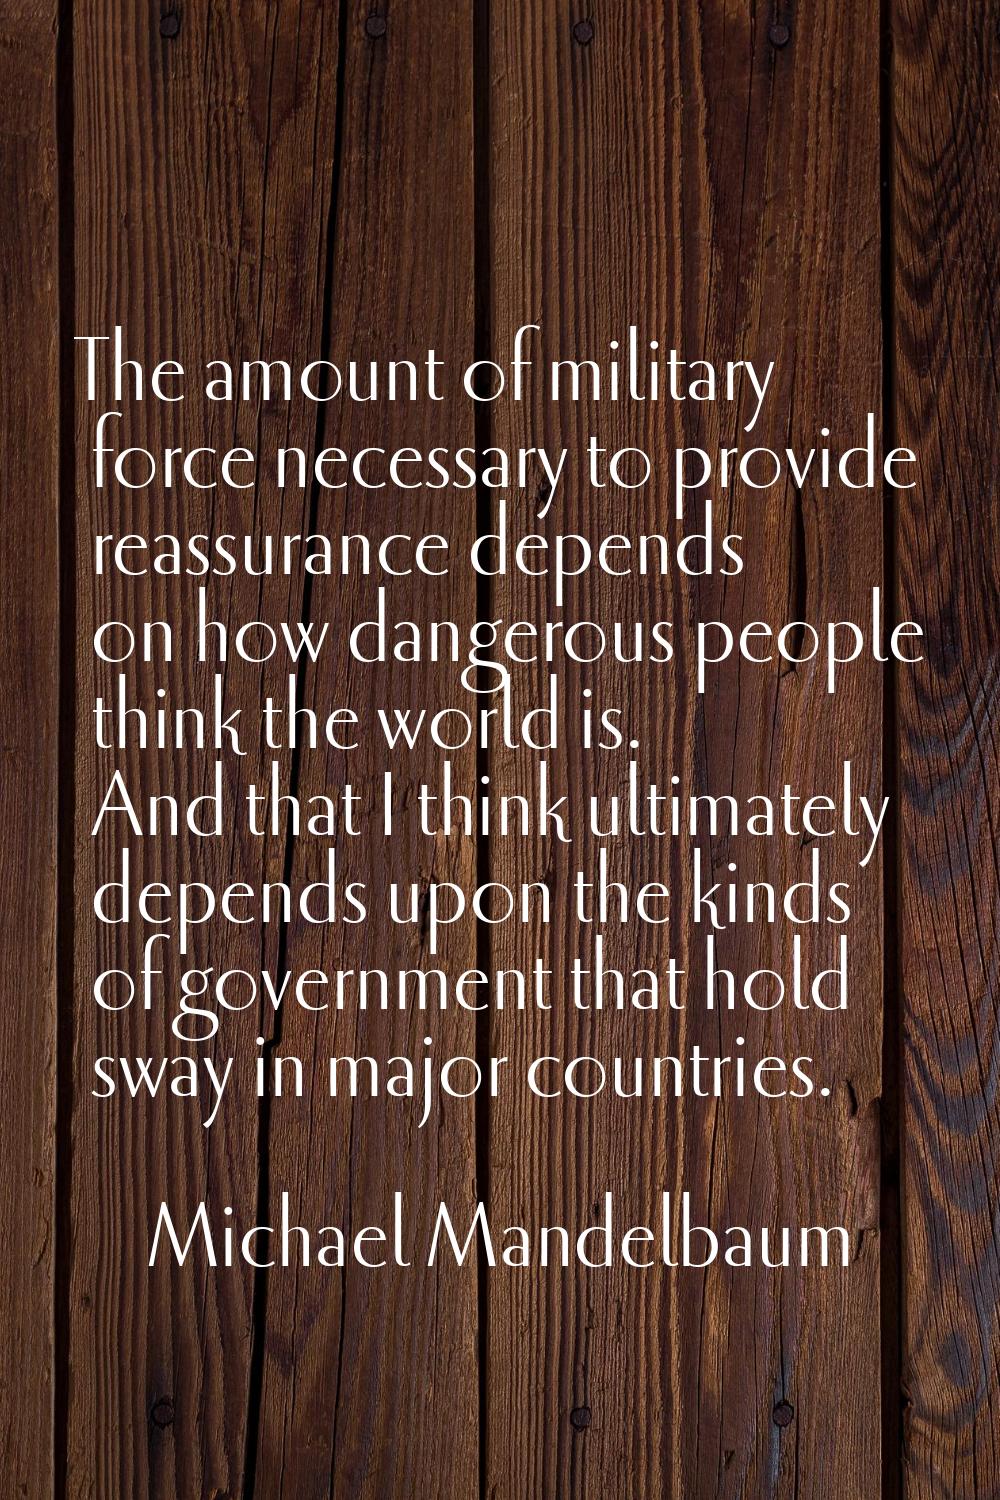 The amount of military force necessary to provide reassurance depends on how dangerous people think